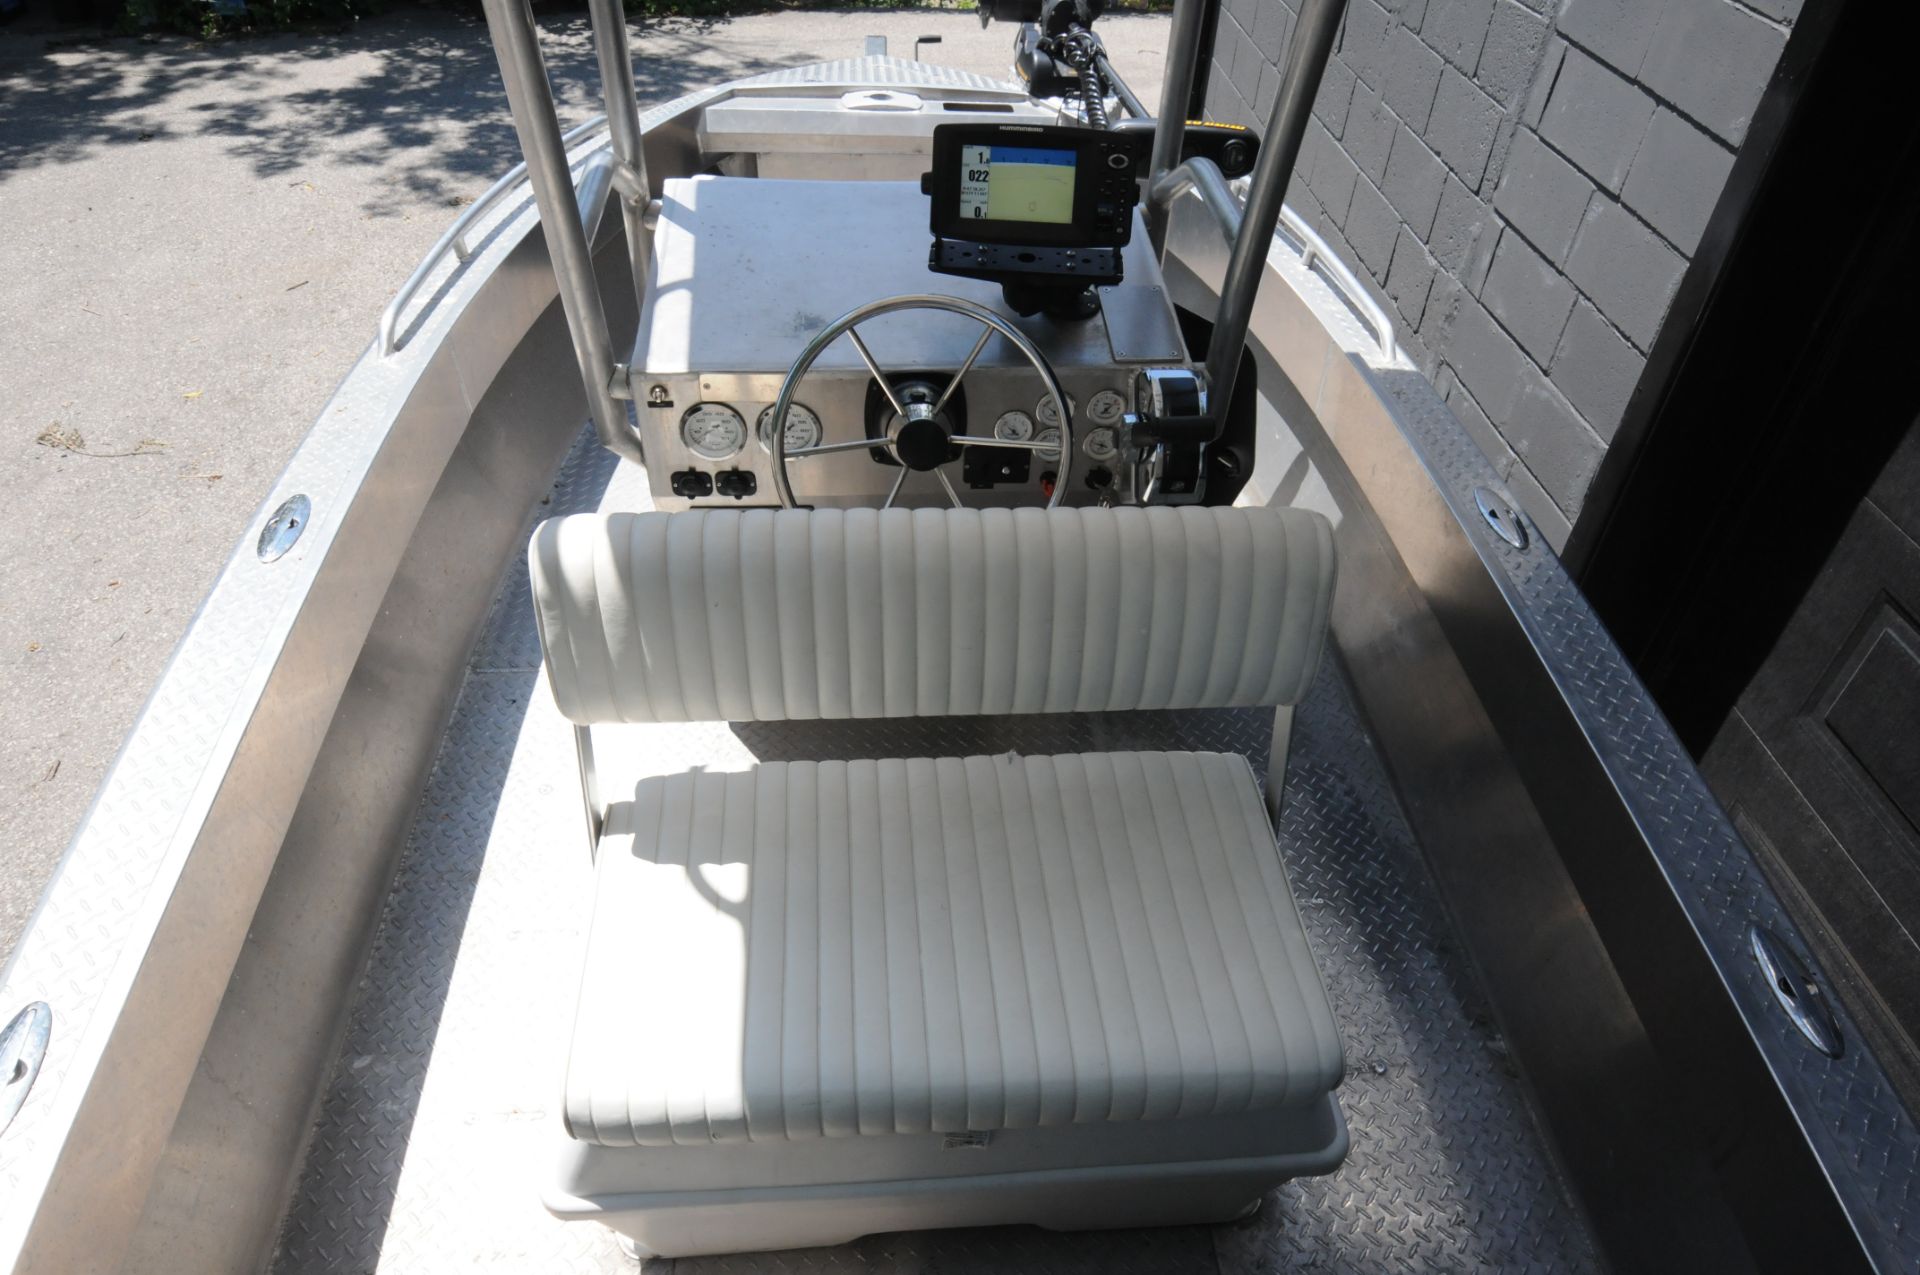 BAYVIEW BOATS (2013) PROFISHER 16 CENTER CONSOLE ALUMINUM FISHING BOAT ALL WELDED CONSTRUCTION - Image 9 of 21